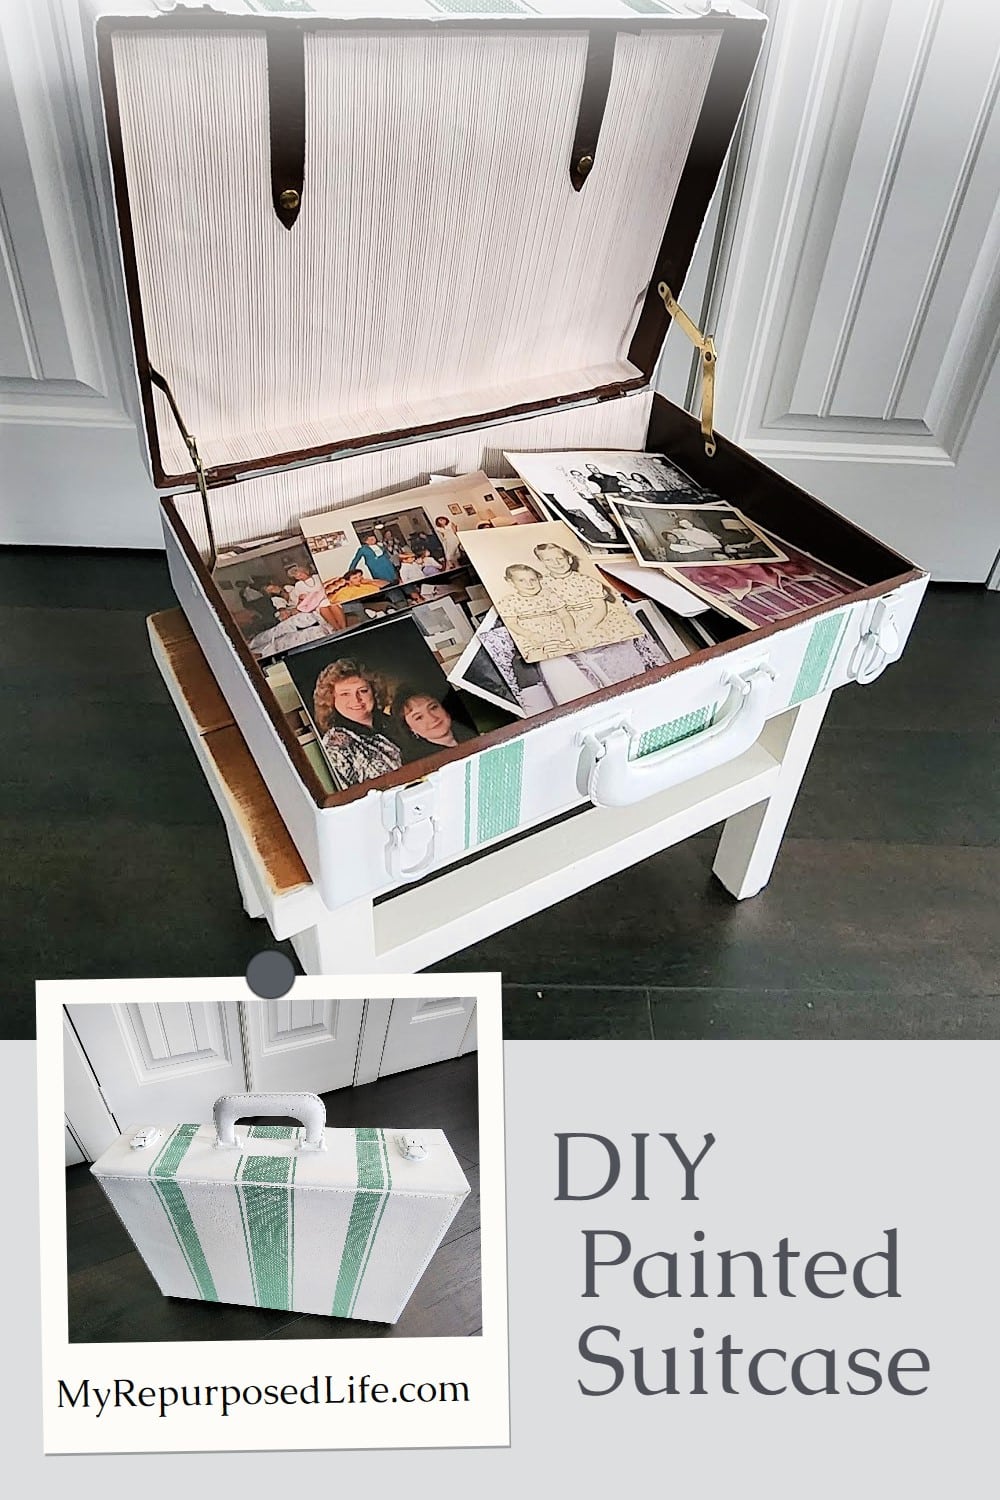 A DIY painted suitcase is perfect for storing sewing or craft supplies. It's a great way to keep old photos handy for sharing. You can even make a pet bed. A dozen ways to use a suitcase as storage and decor. #MyRepurposedLife via @repurposedlife